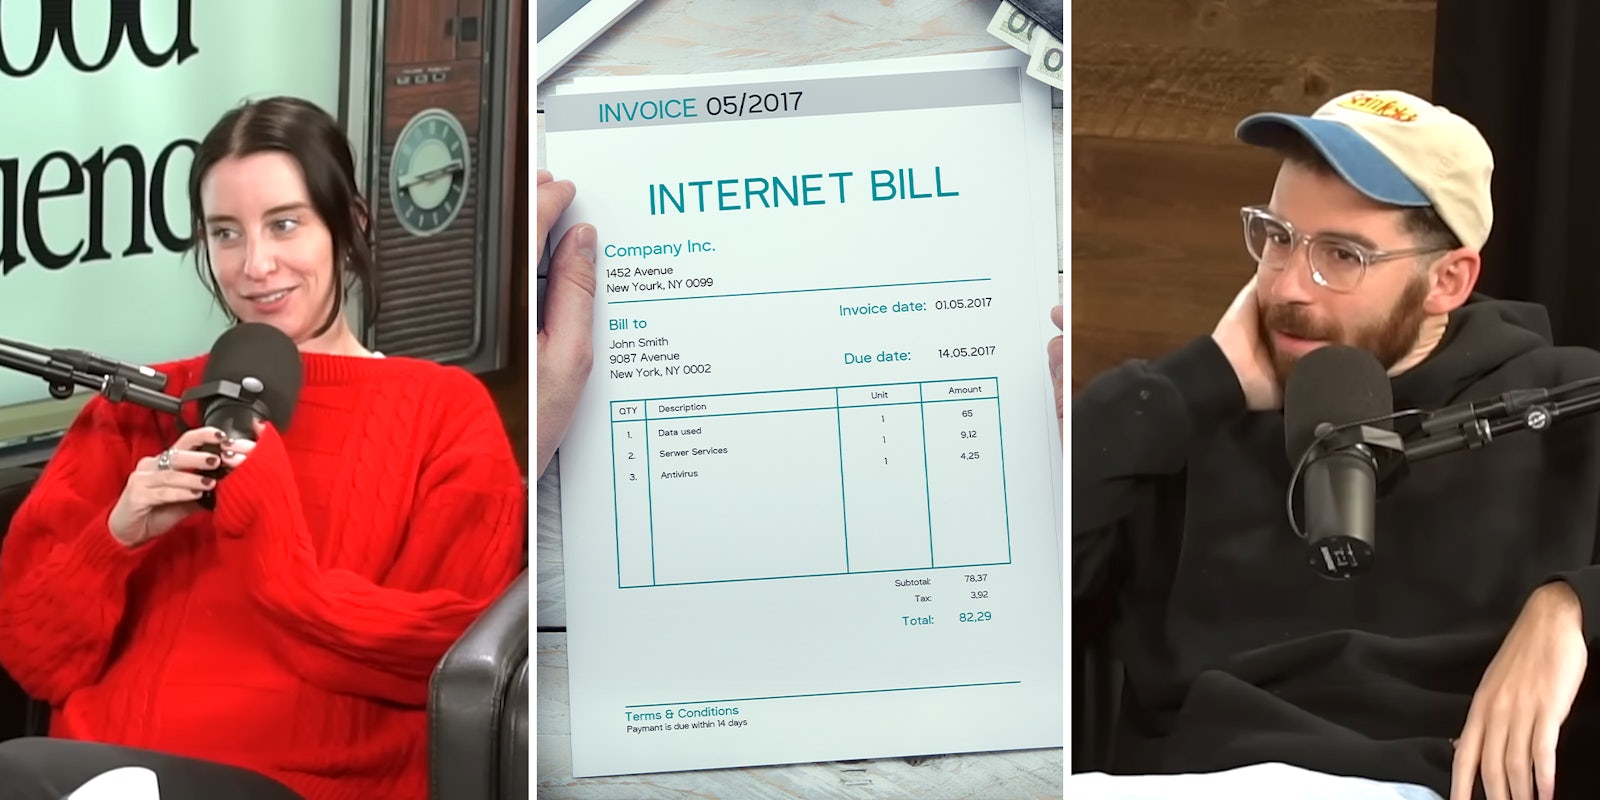 Man shares how to trick workers into lowering your internet bill for you